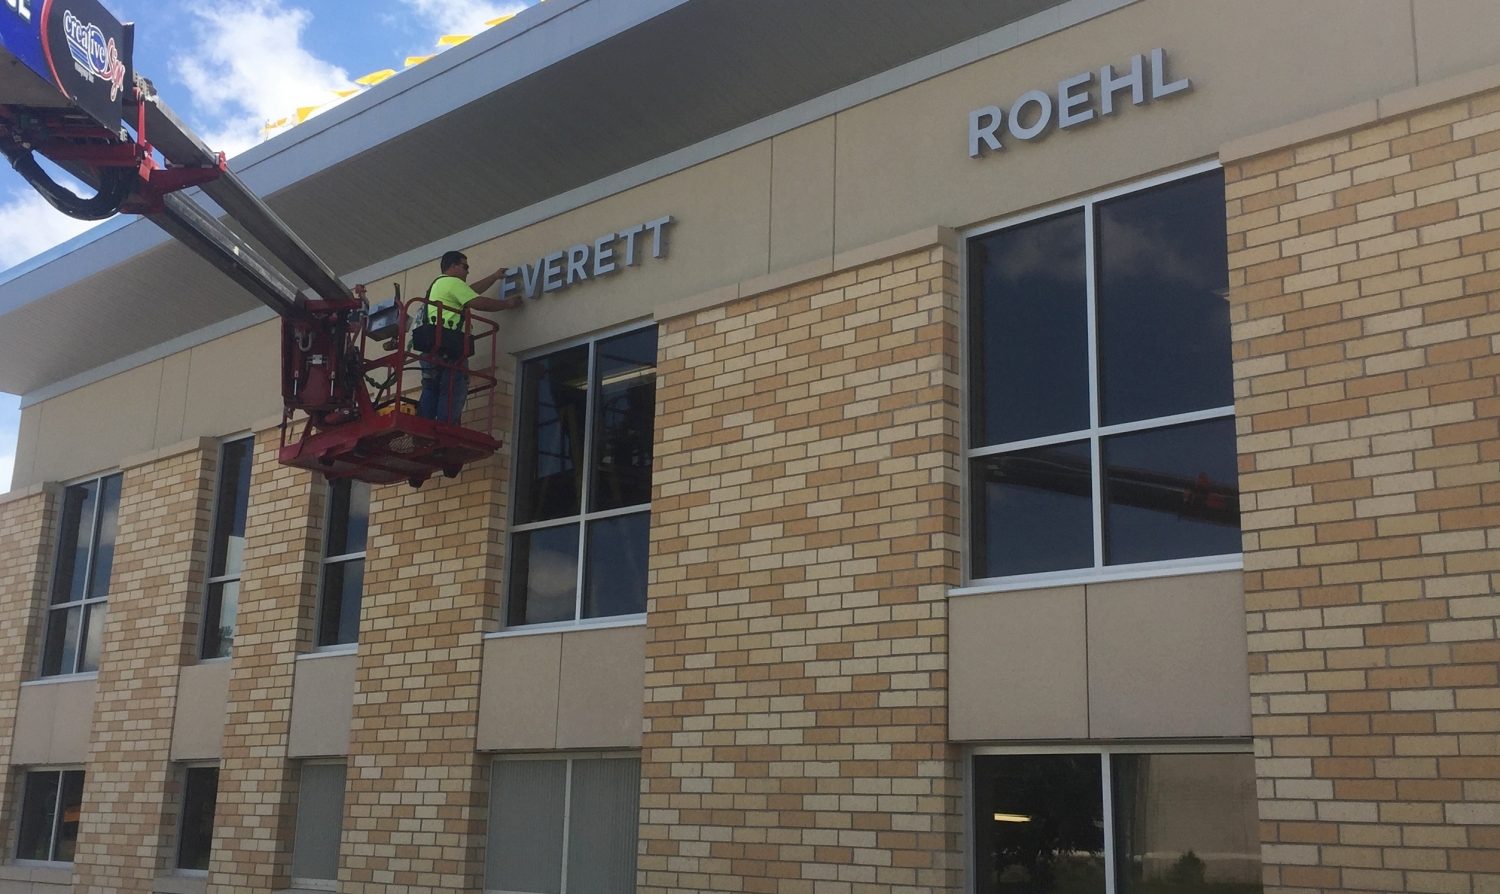 Trent Nolan with Creative Sign Company Inc. from De Pere installs the letter “e” sign on the Everett Roehl Marshfield Public Library on July 12.